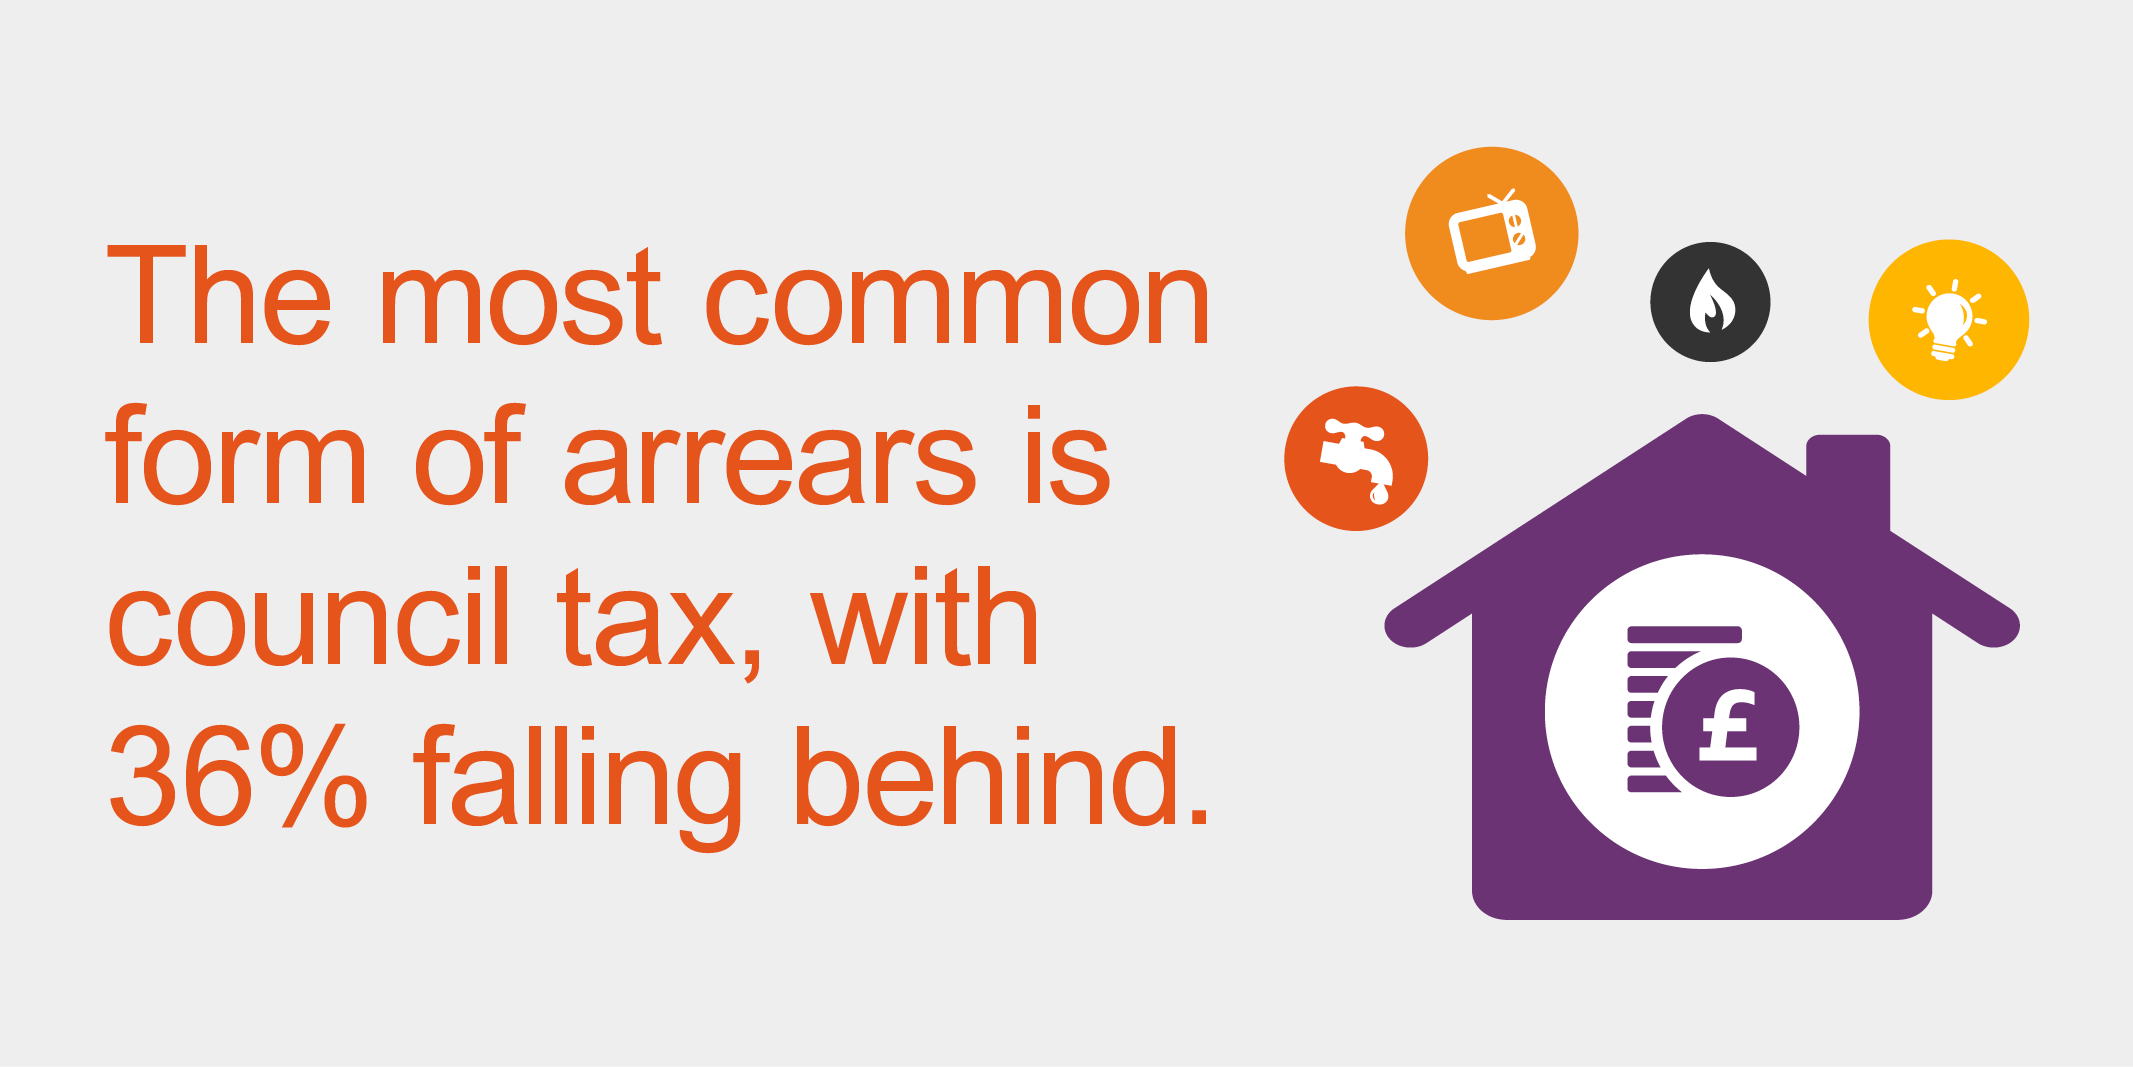 Wales in the Red 2019 report council tax arrears is the most common debt in Wales